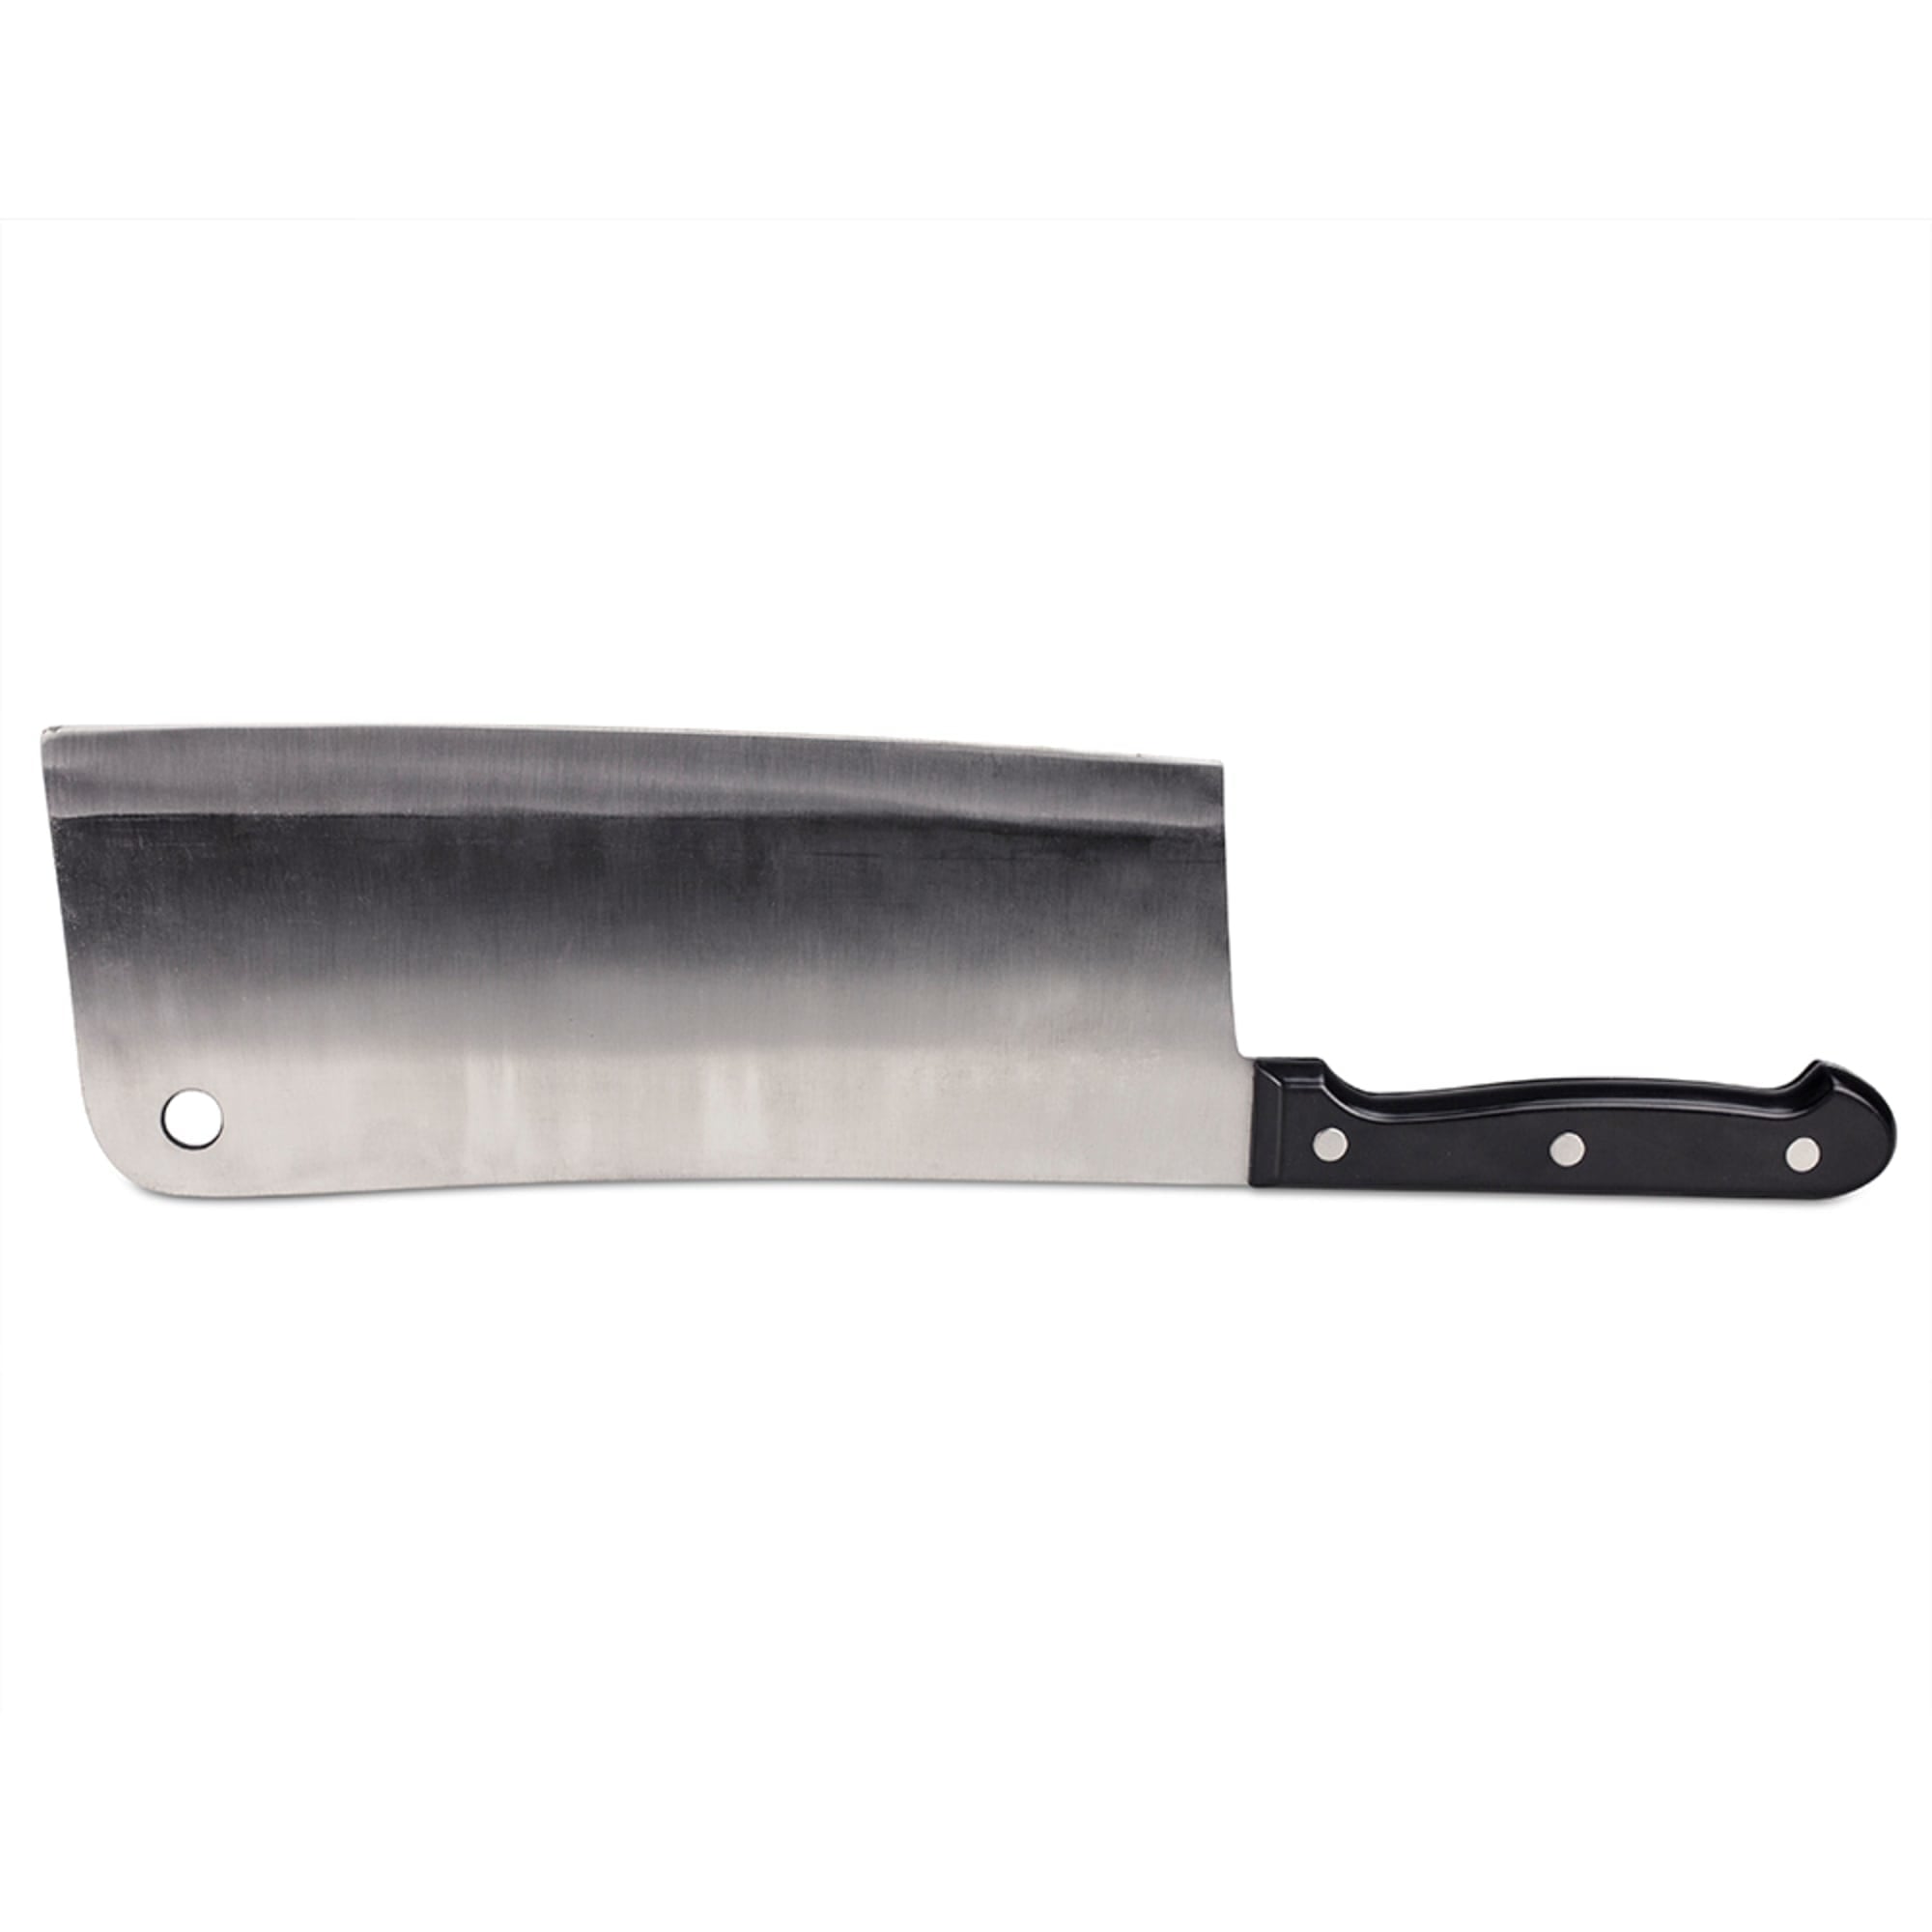 Home Basics 9" Meat Cleaver $5.00 EACH, CASE PACK OF 24